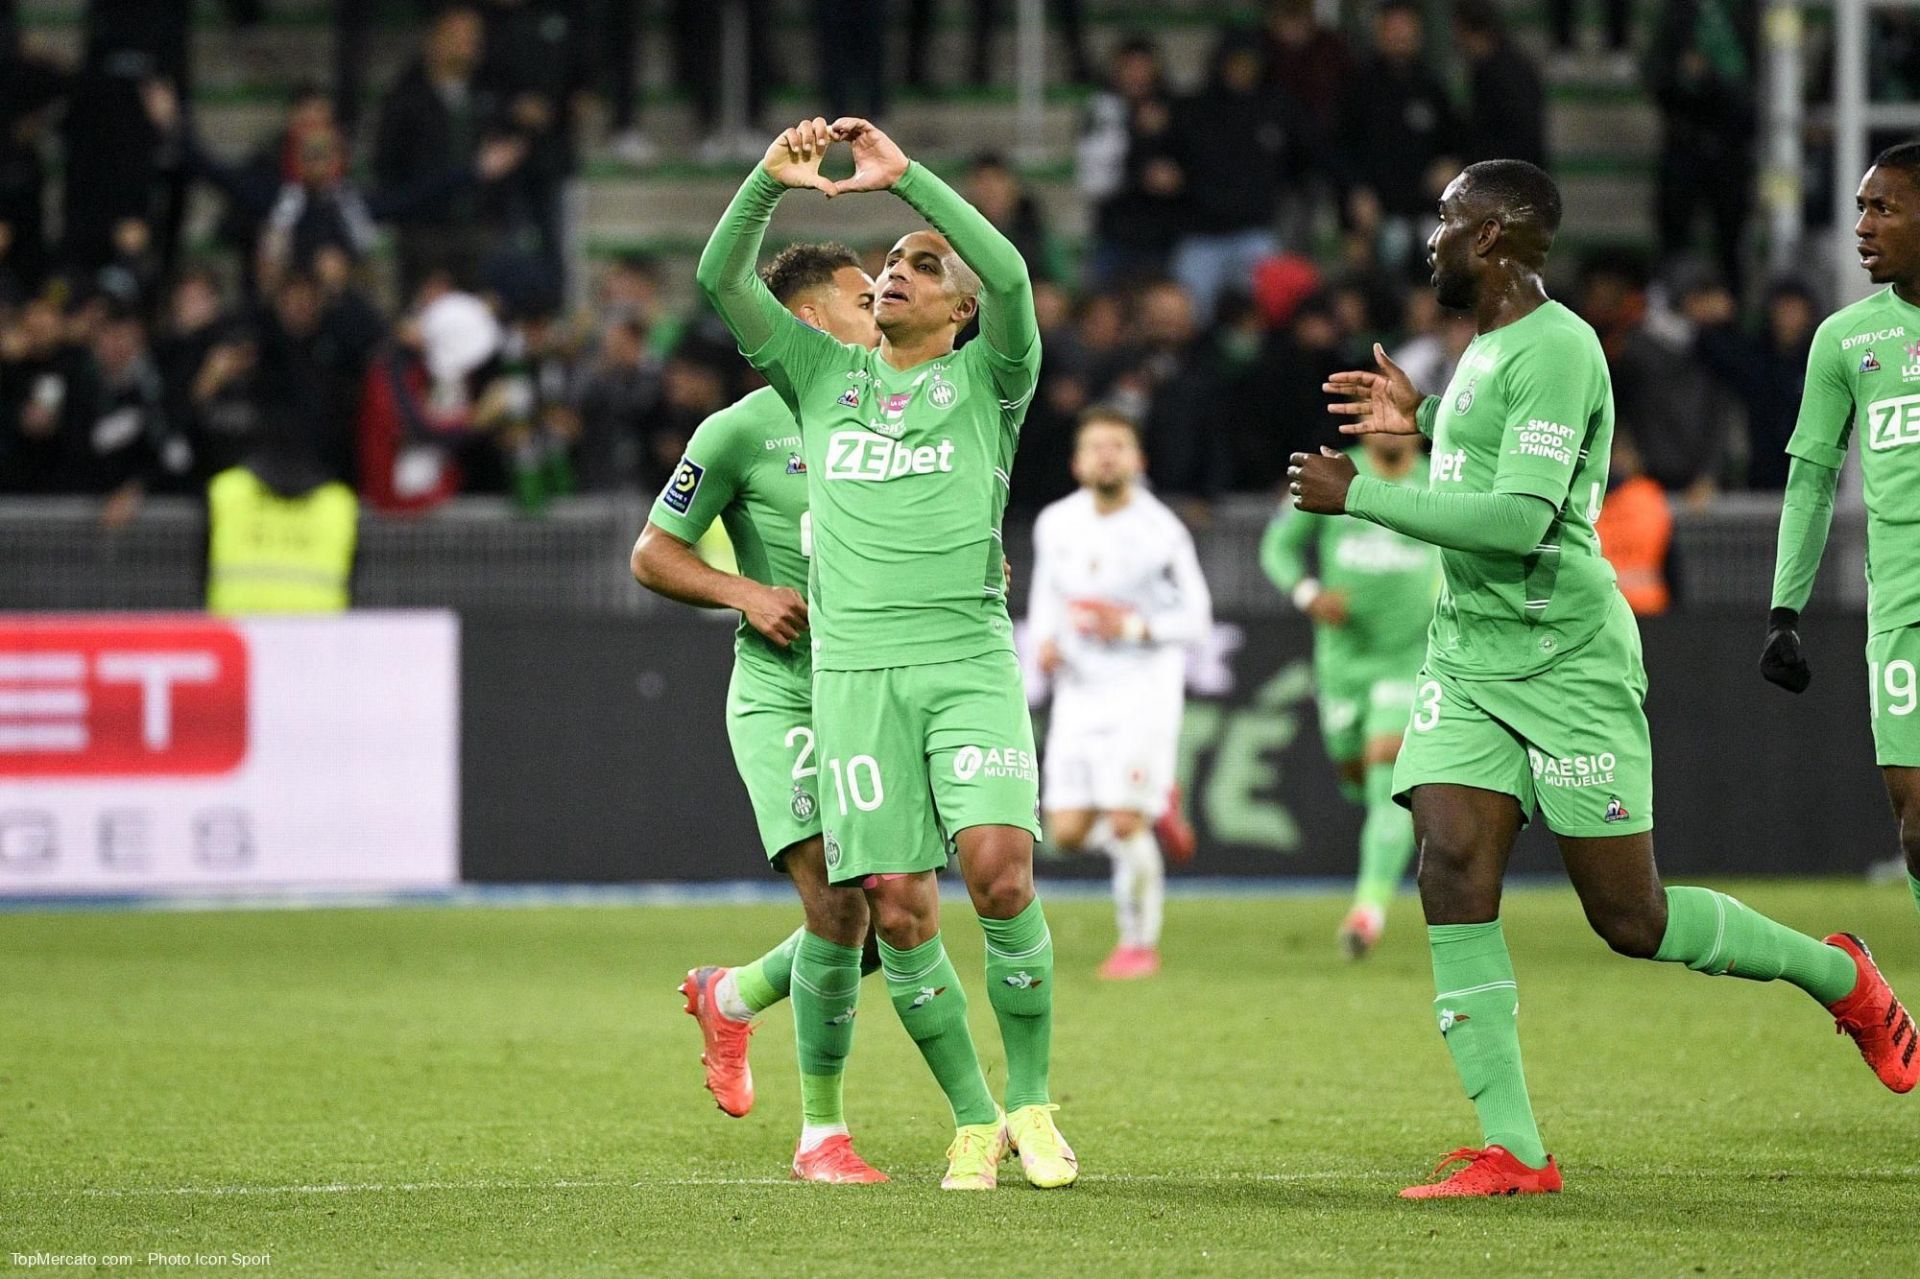 Can Saint-Etienne pick up their second win of the 2021-22 campaign against Troyes?